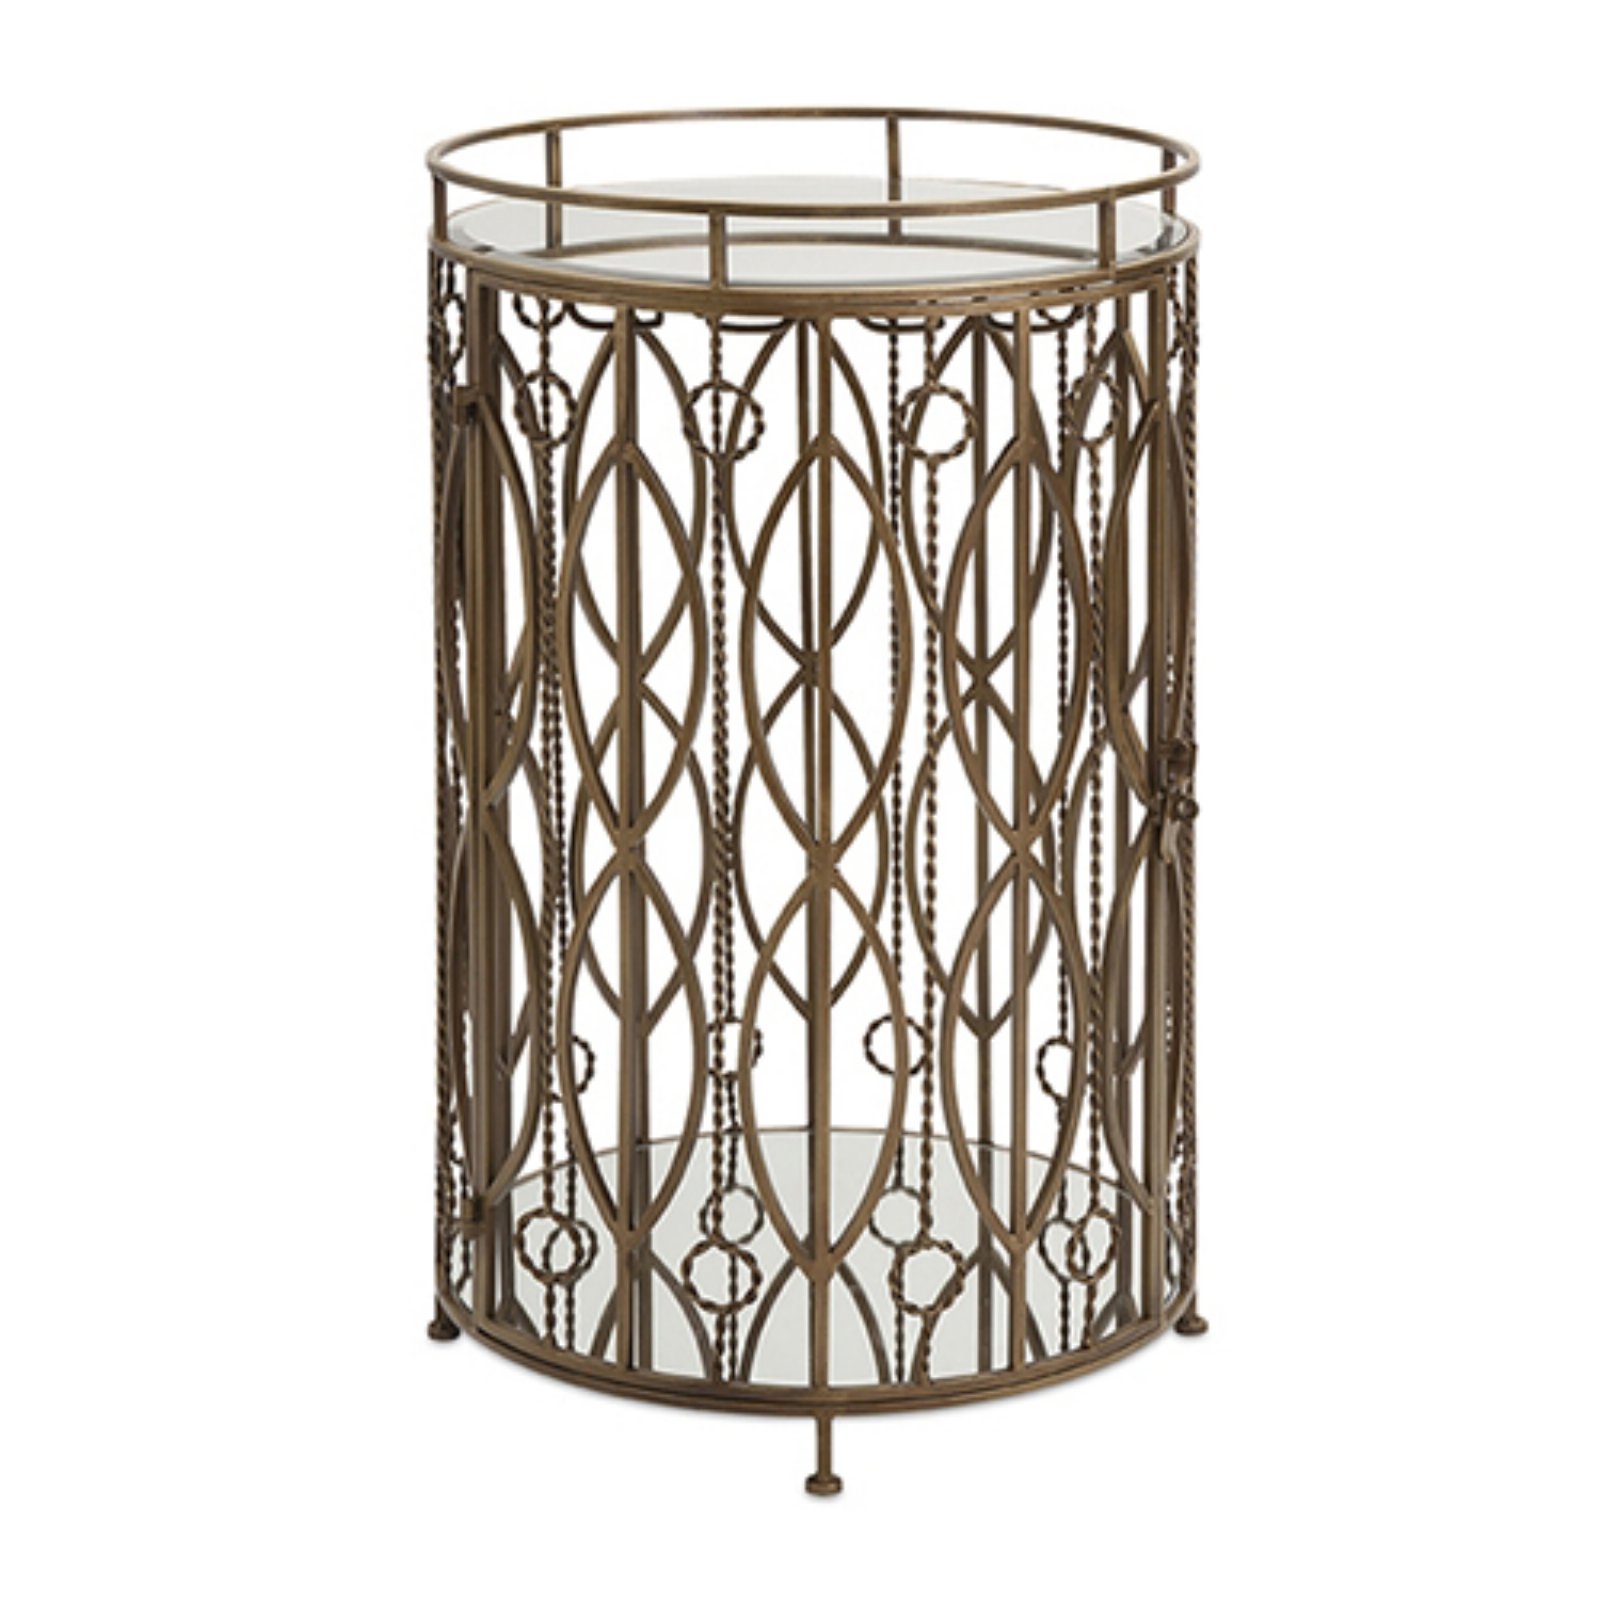 verona accent table bar bronze inuse uttermost rubati wooden trestle blown glass chandelier bunnings outdoor settings pottery barn chairs tables edmonton tennis small blue end